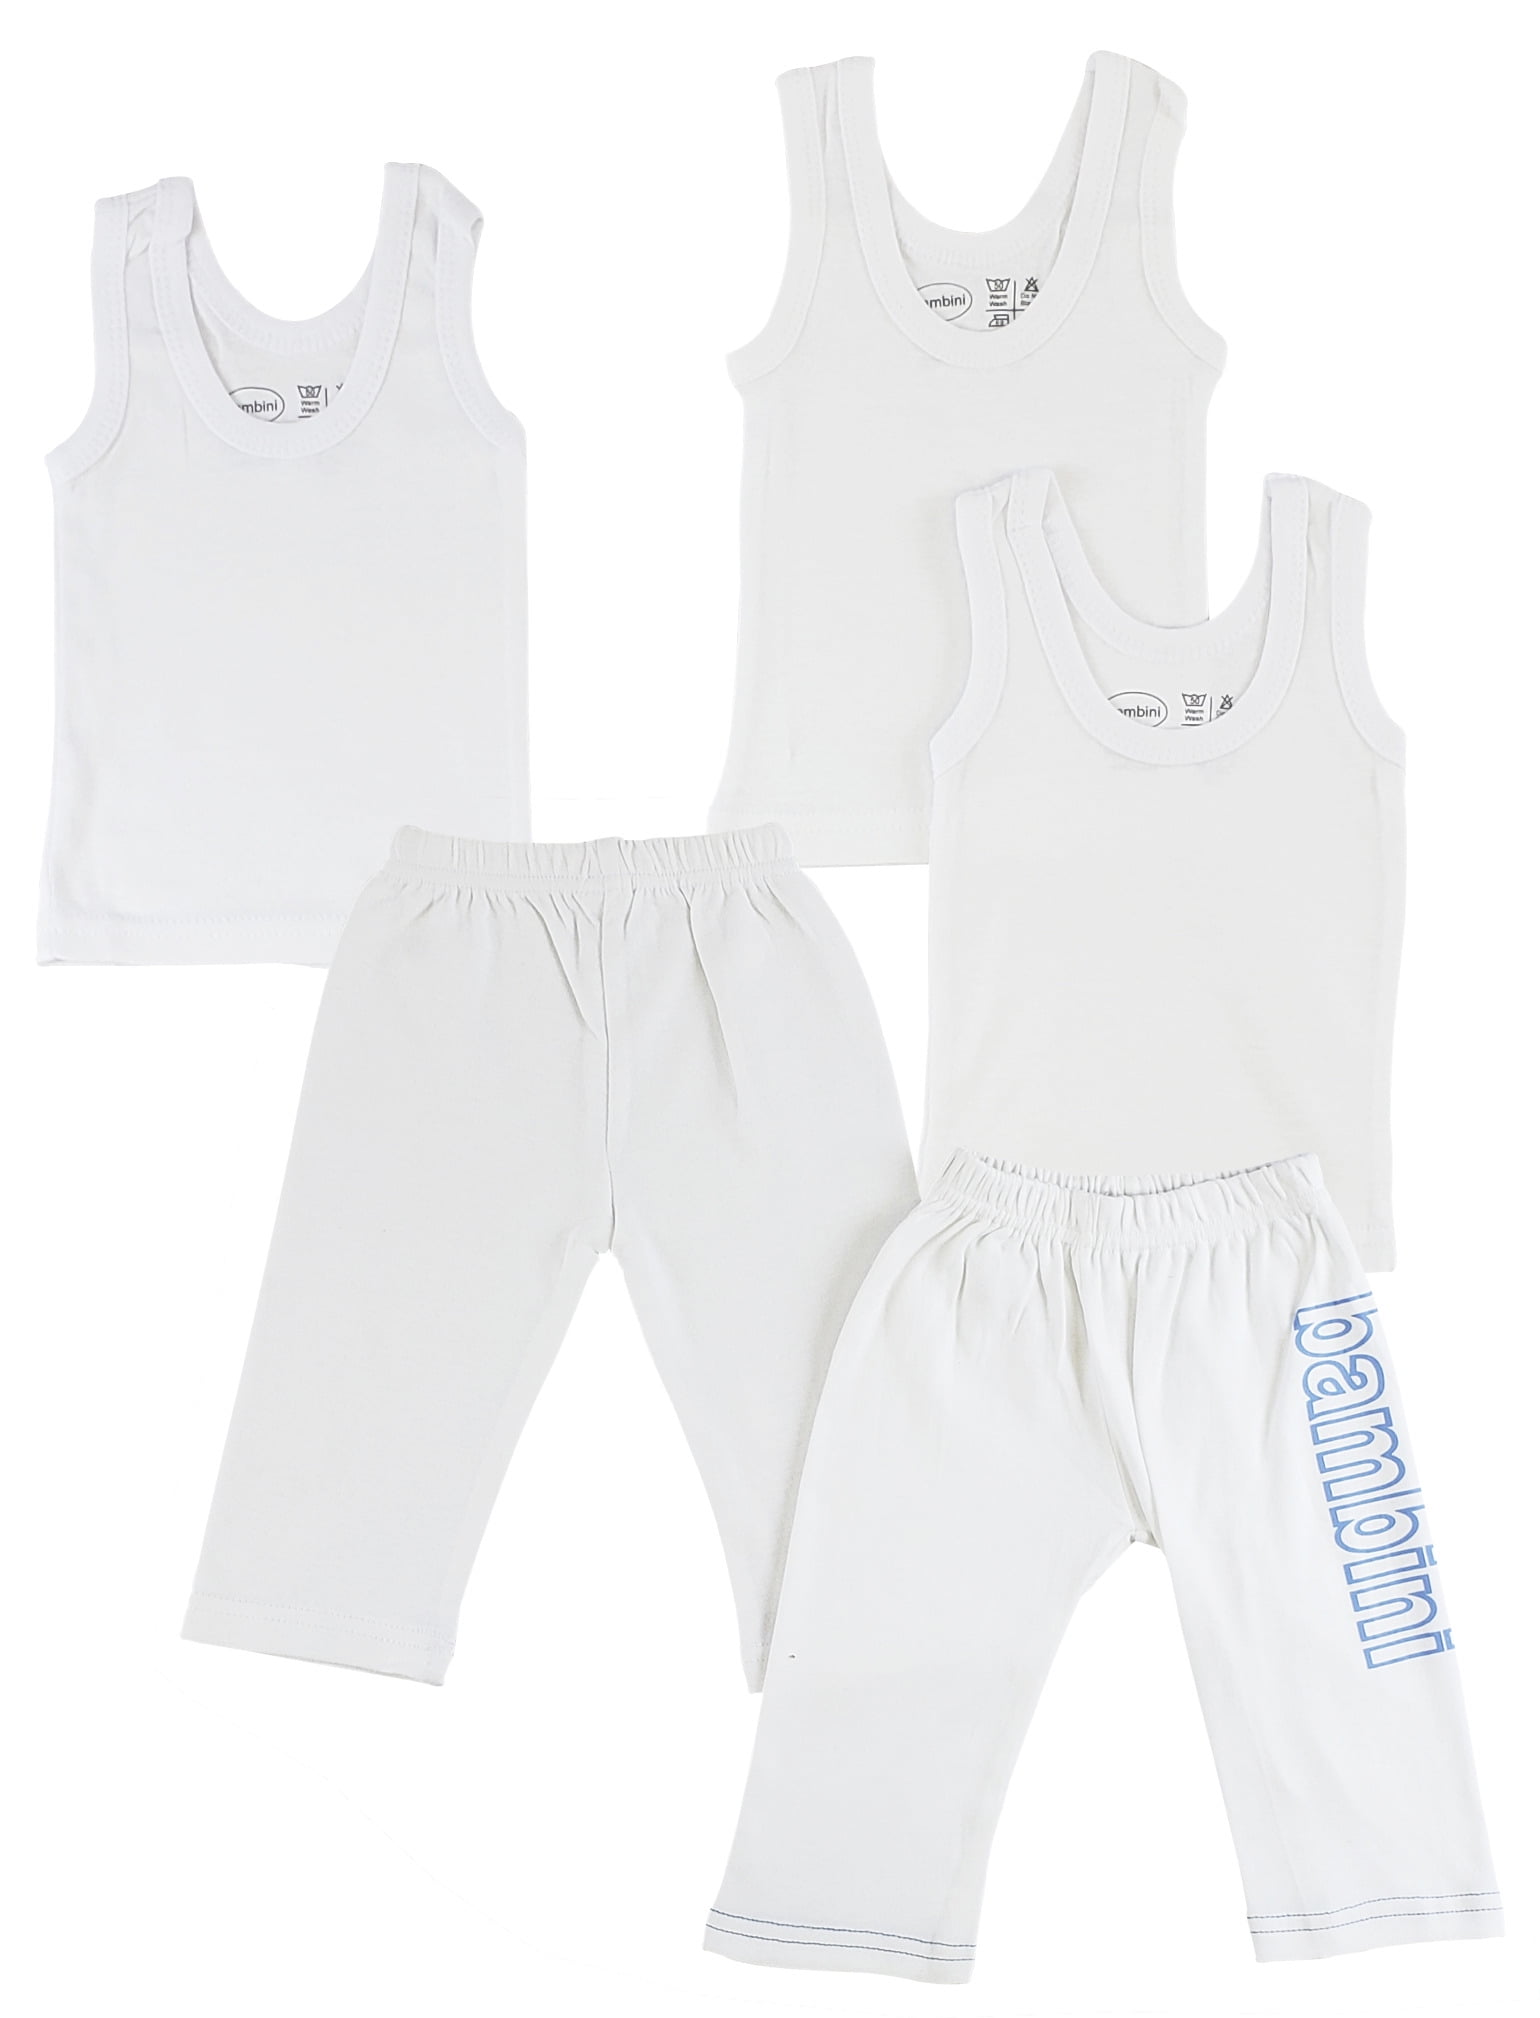 Bambini Mix N Match Tank Tops & Track Sweatpants, 5pc (Baby Boys or Baby  Girls, Unisex) 